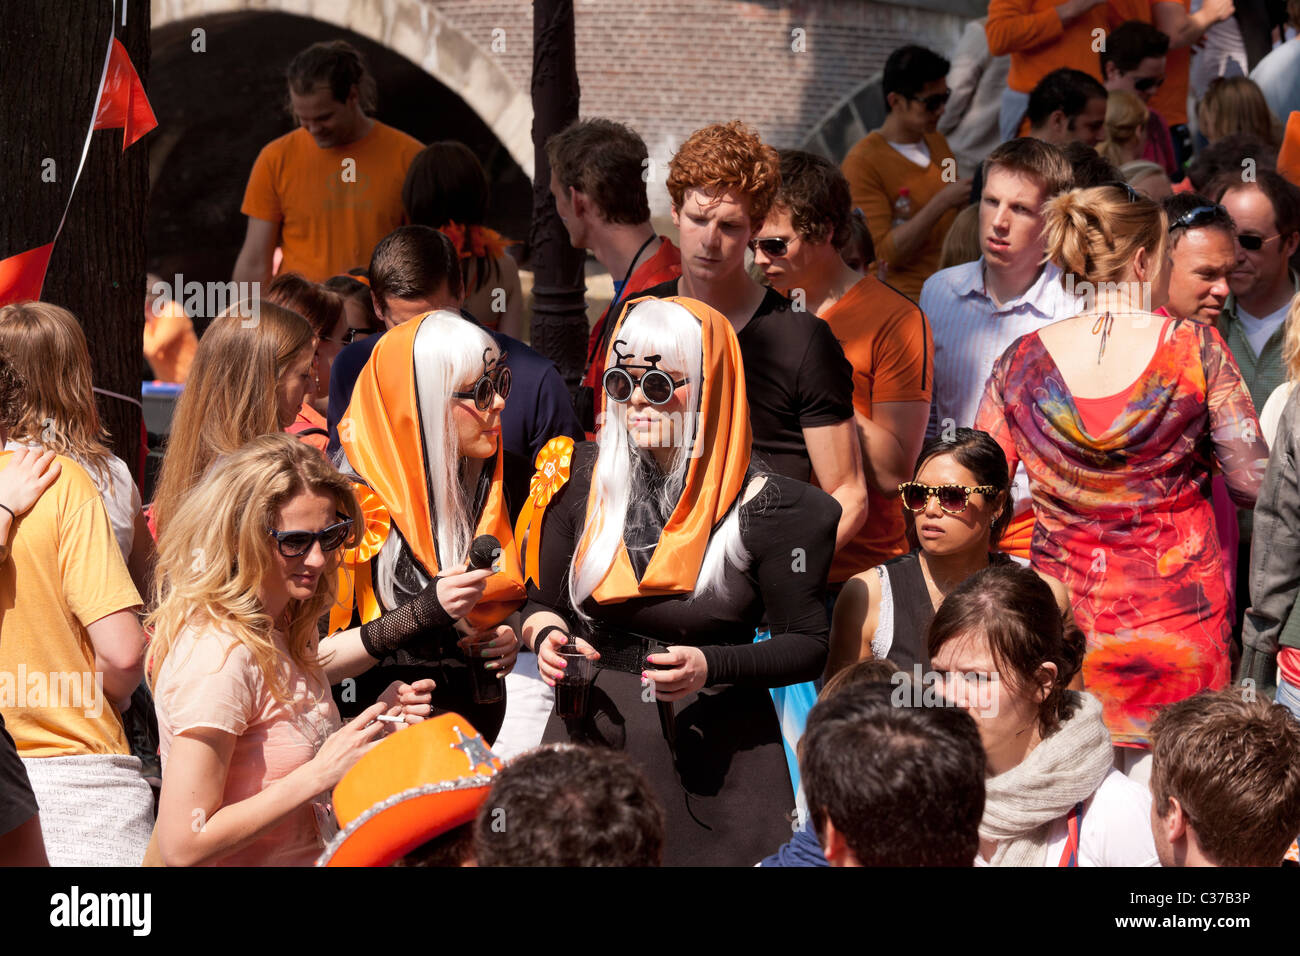 Two Lady Gaga look-a-likes on Kingsday, the King's birthday in Amsterdam. Funny hats and glasses and lots of orange garb. Stock Photo